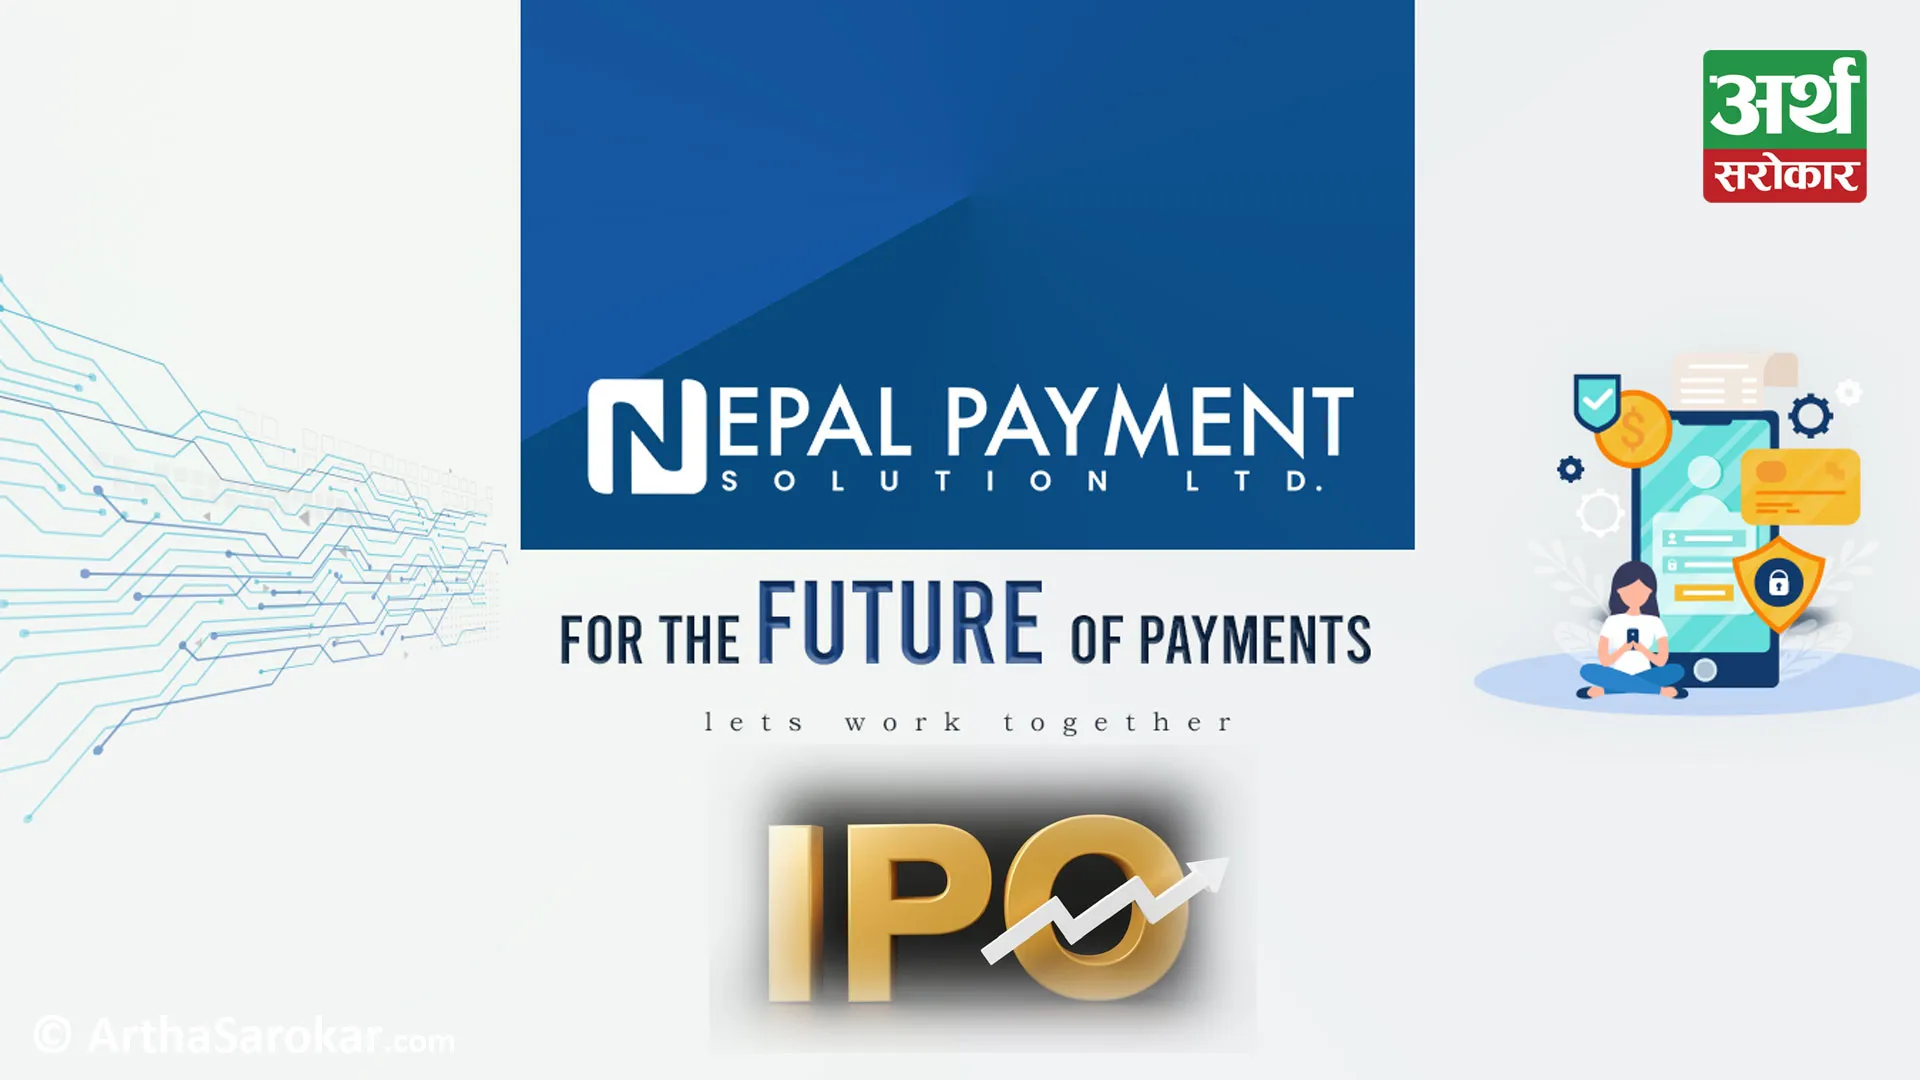 Nepal Payment Solution Limited announces plans to issue an IPO